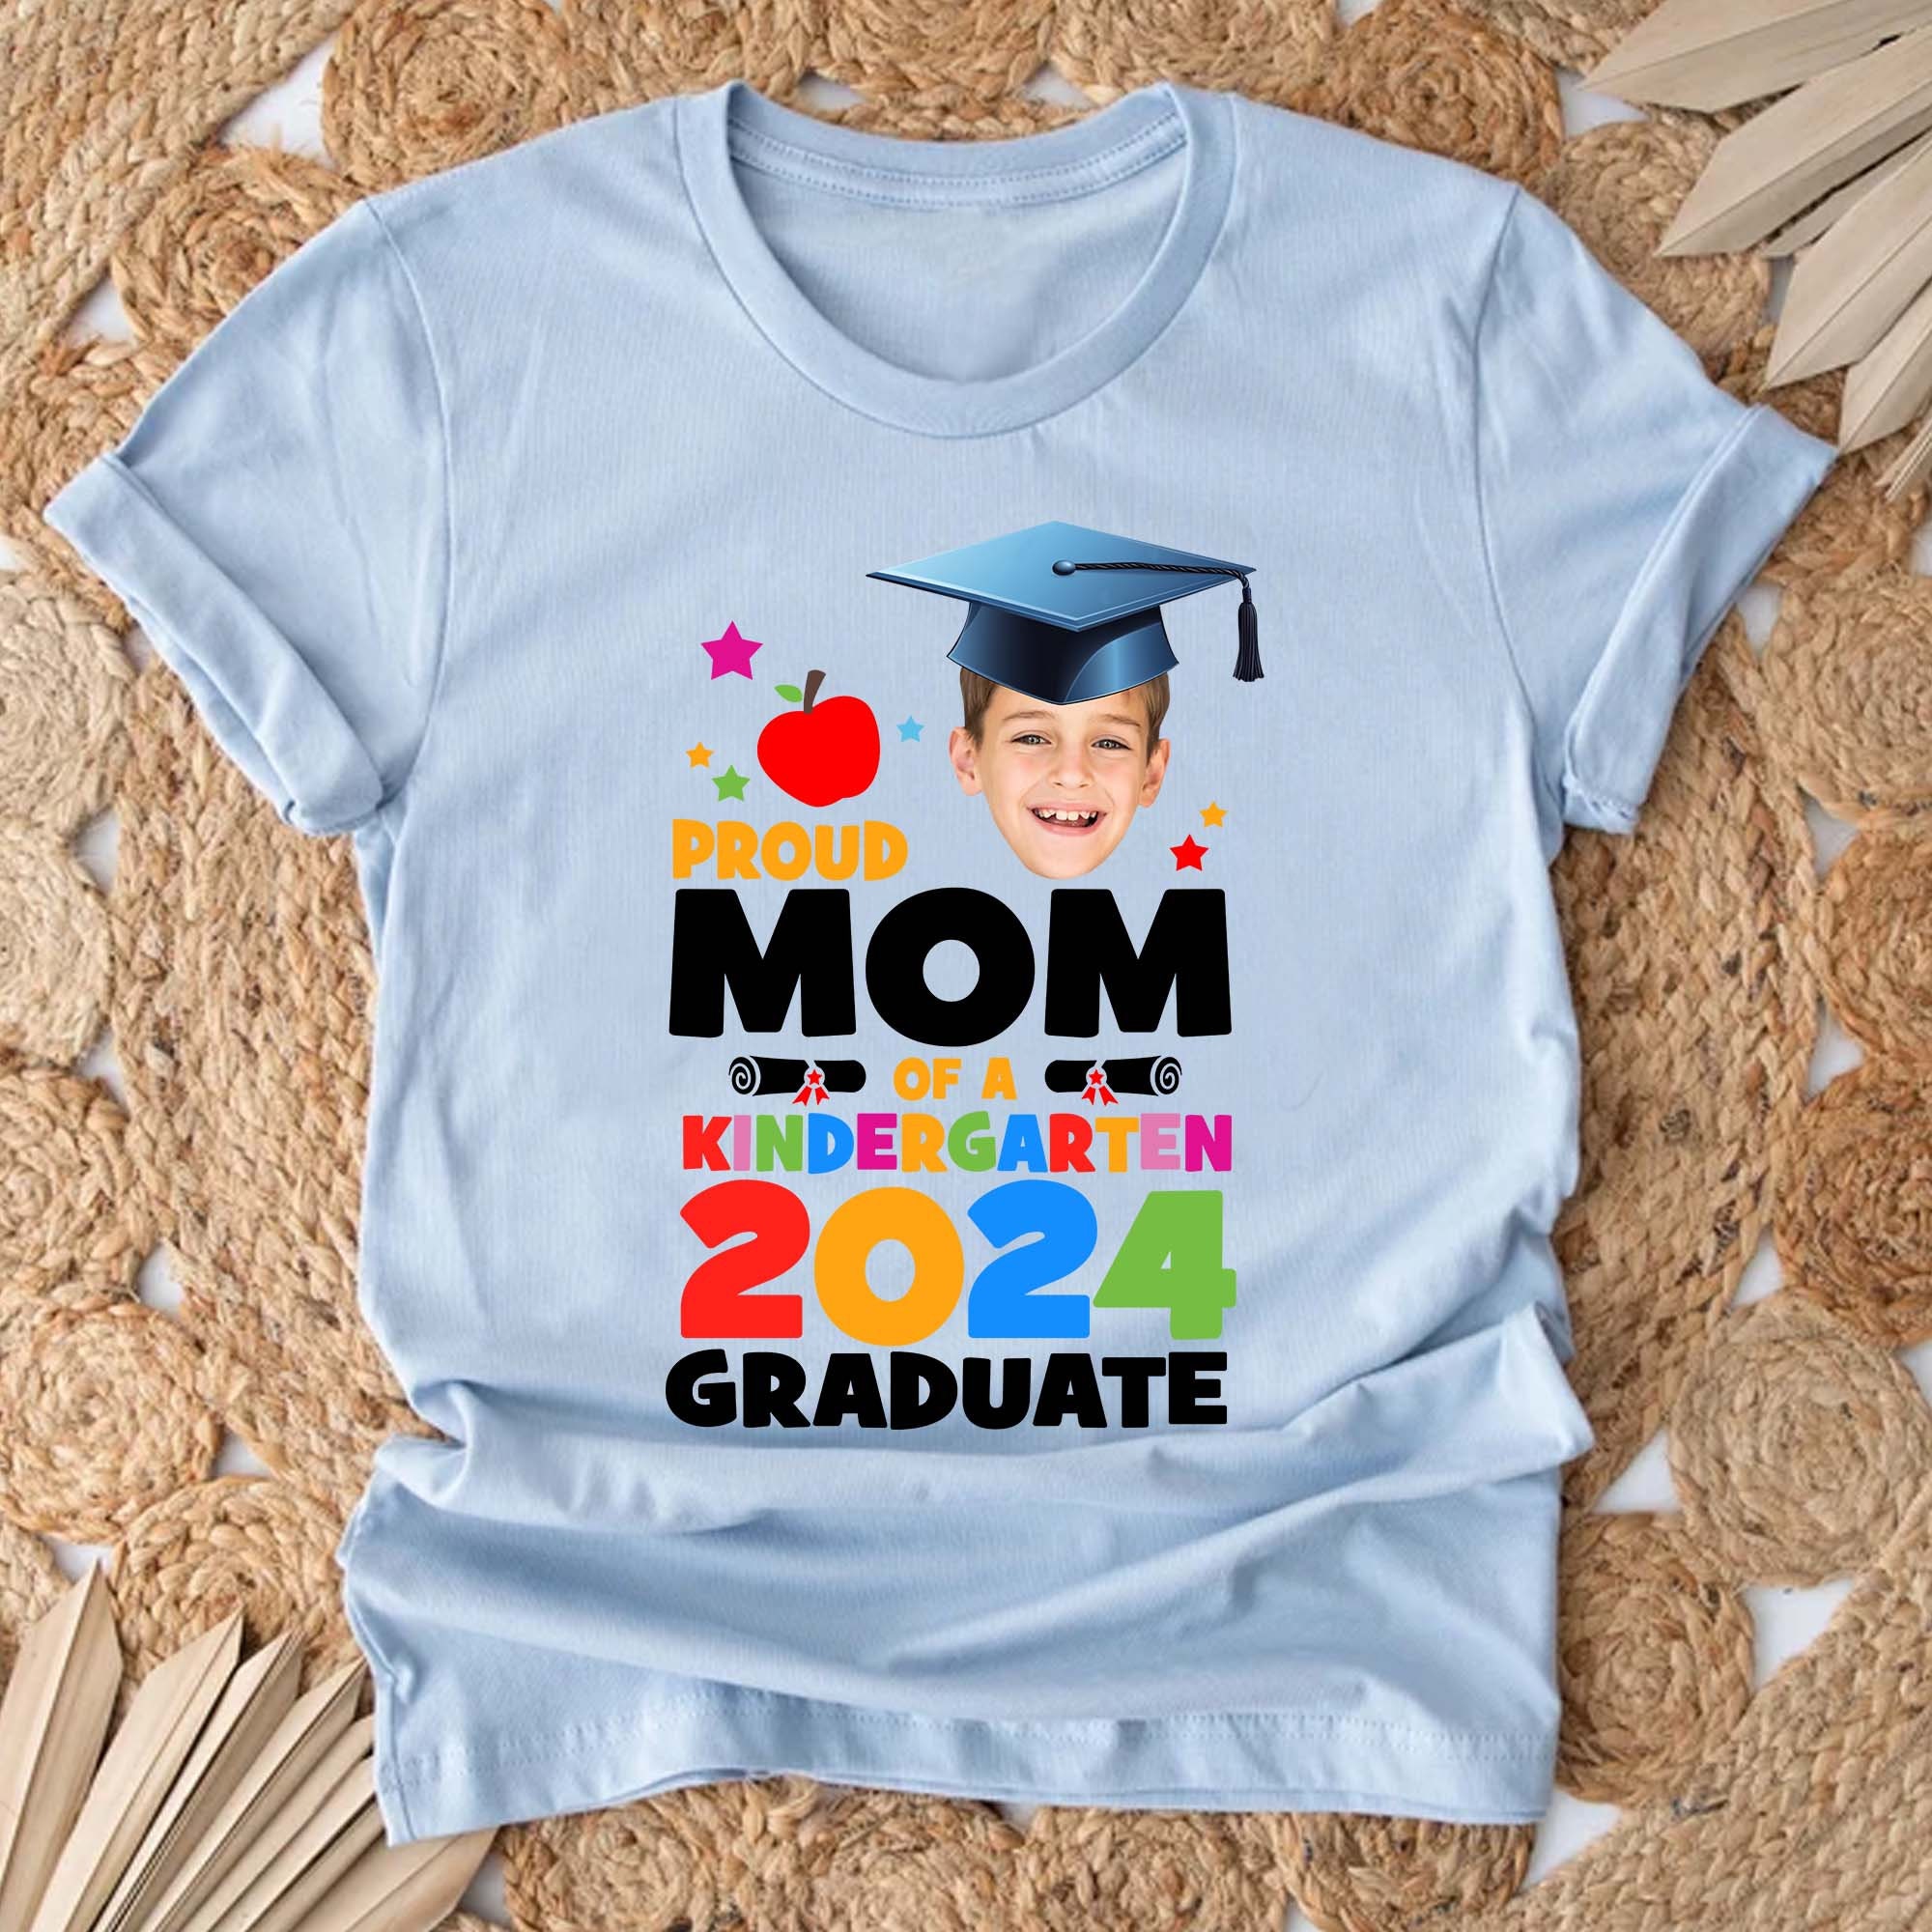 Personalized Proud Of A Kindergarten 2024 Graduate Shirt, Custom Photo Proud Shirt, 2024 Custom Kindergarten Family Shirts, Proud Family